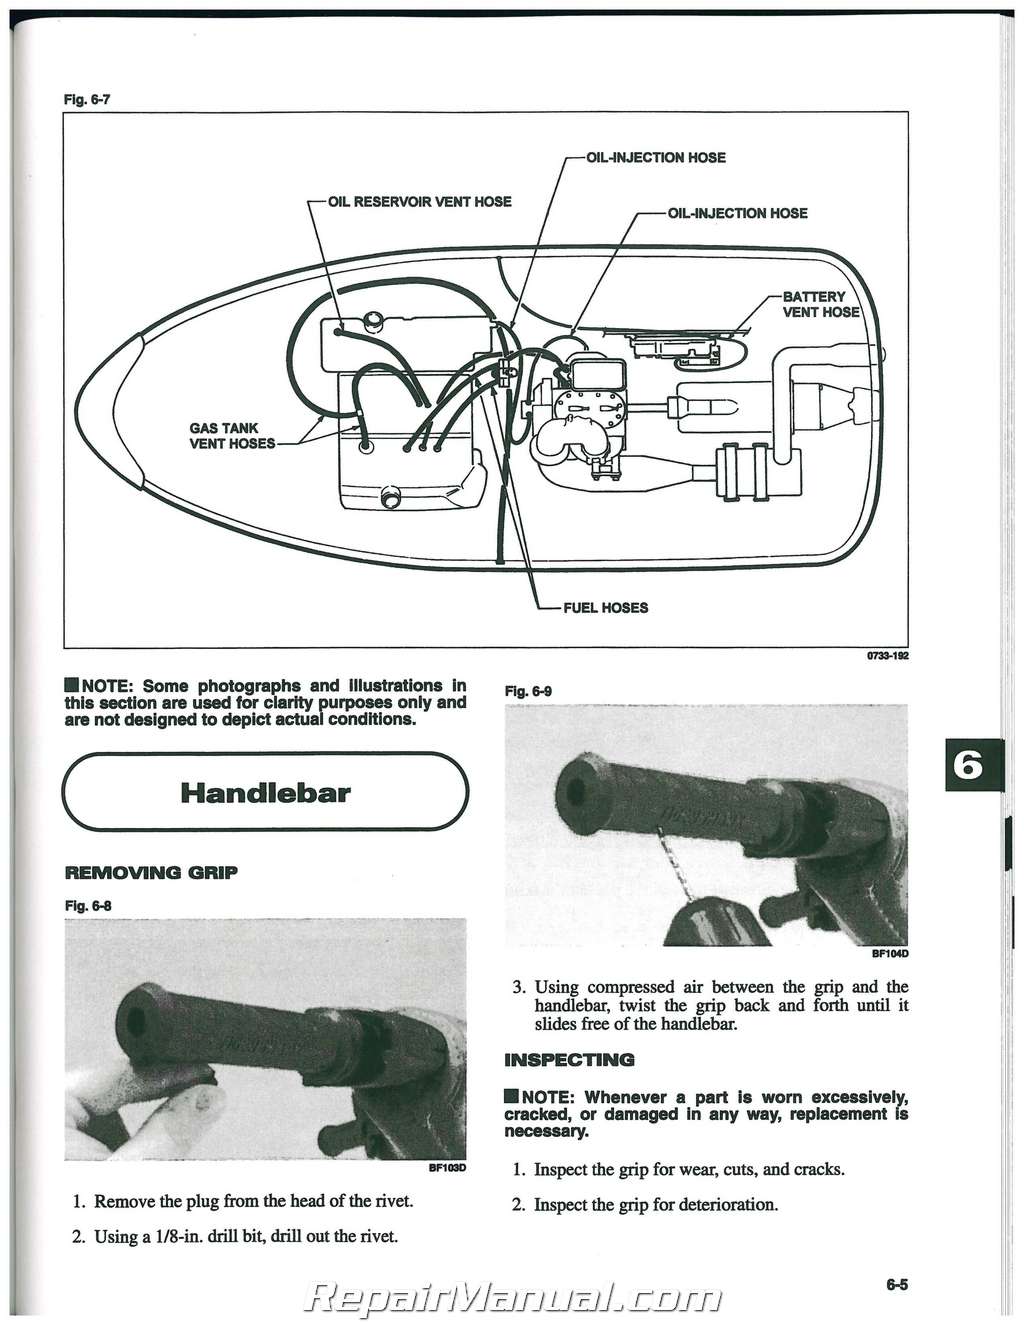 1997 monte carlo owners manual